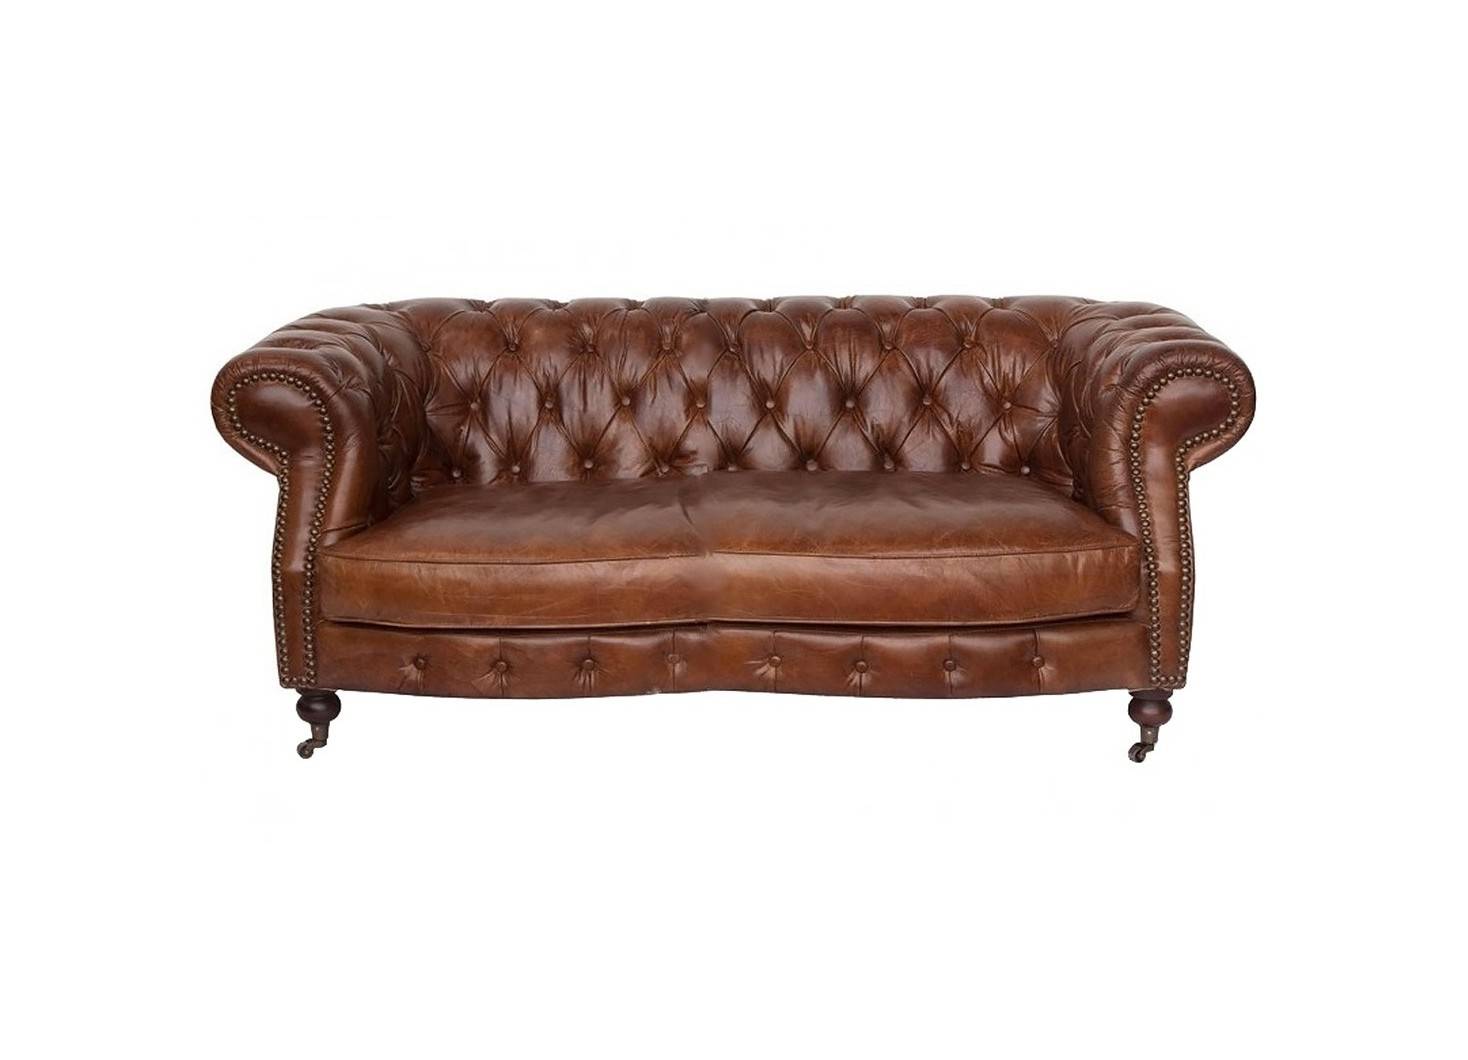 Sofa Chesterfield Zola 2 seaters